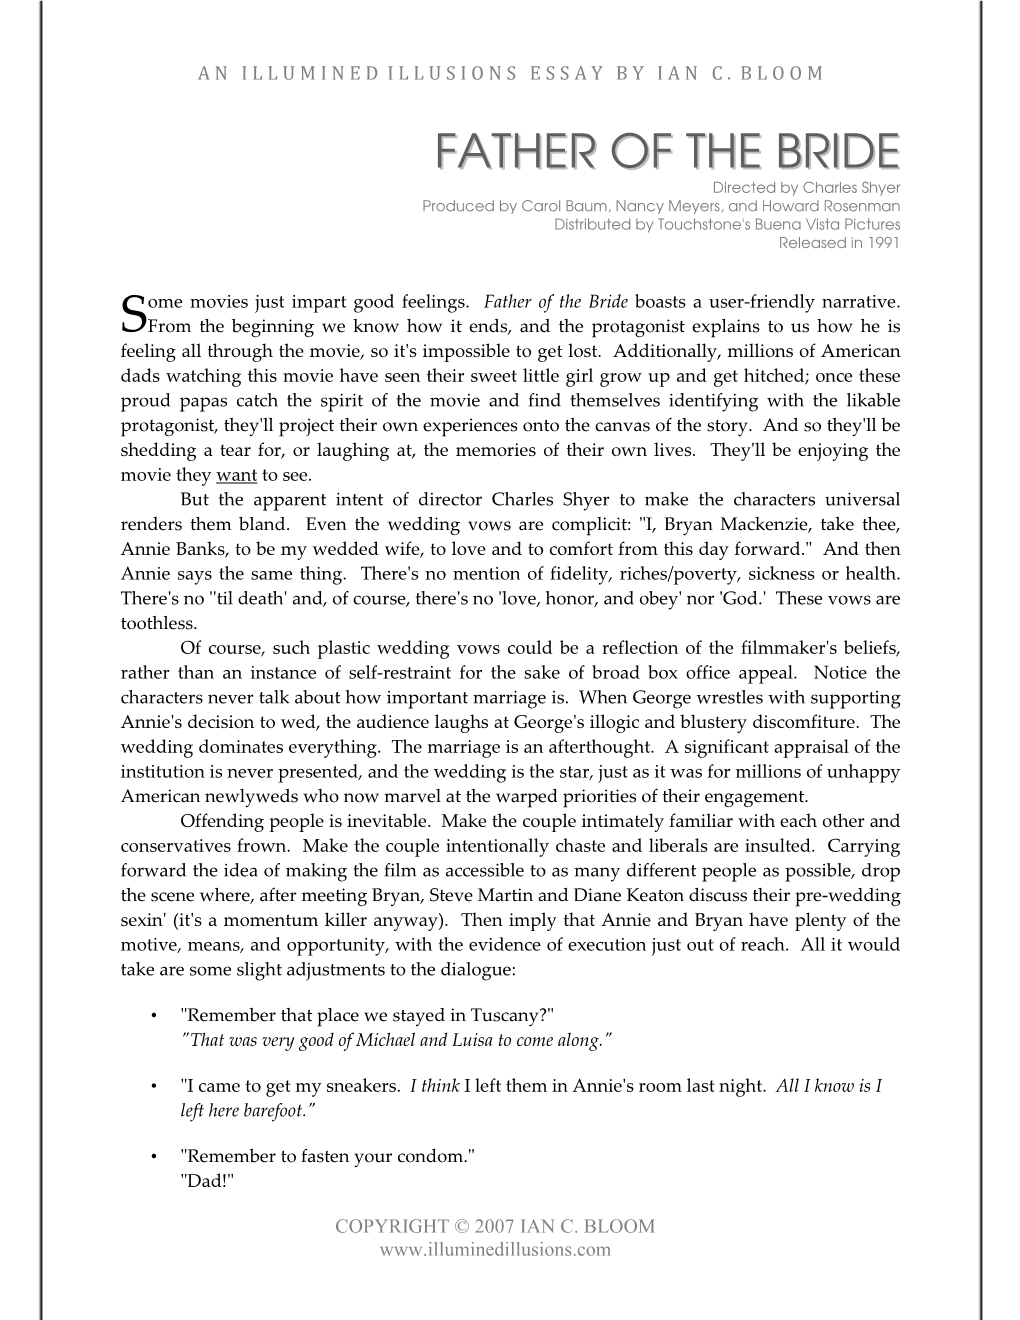 Father of the Bride Boasts a User-Friendly Narrative